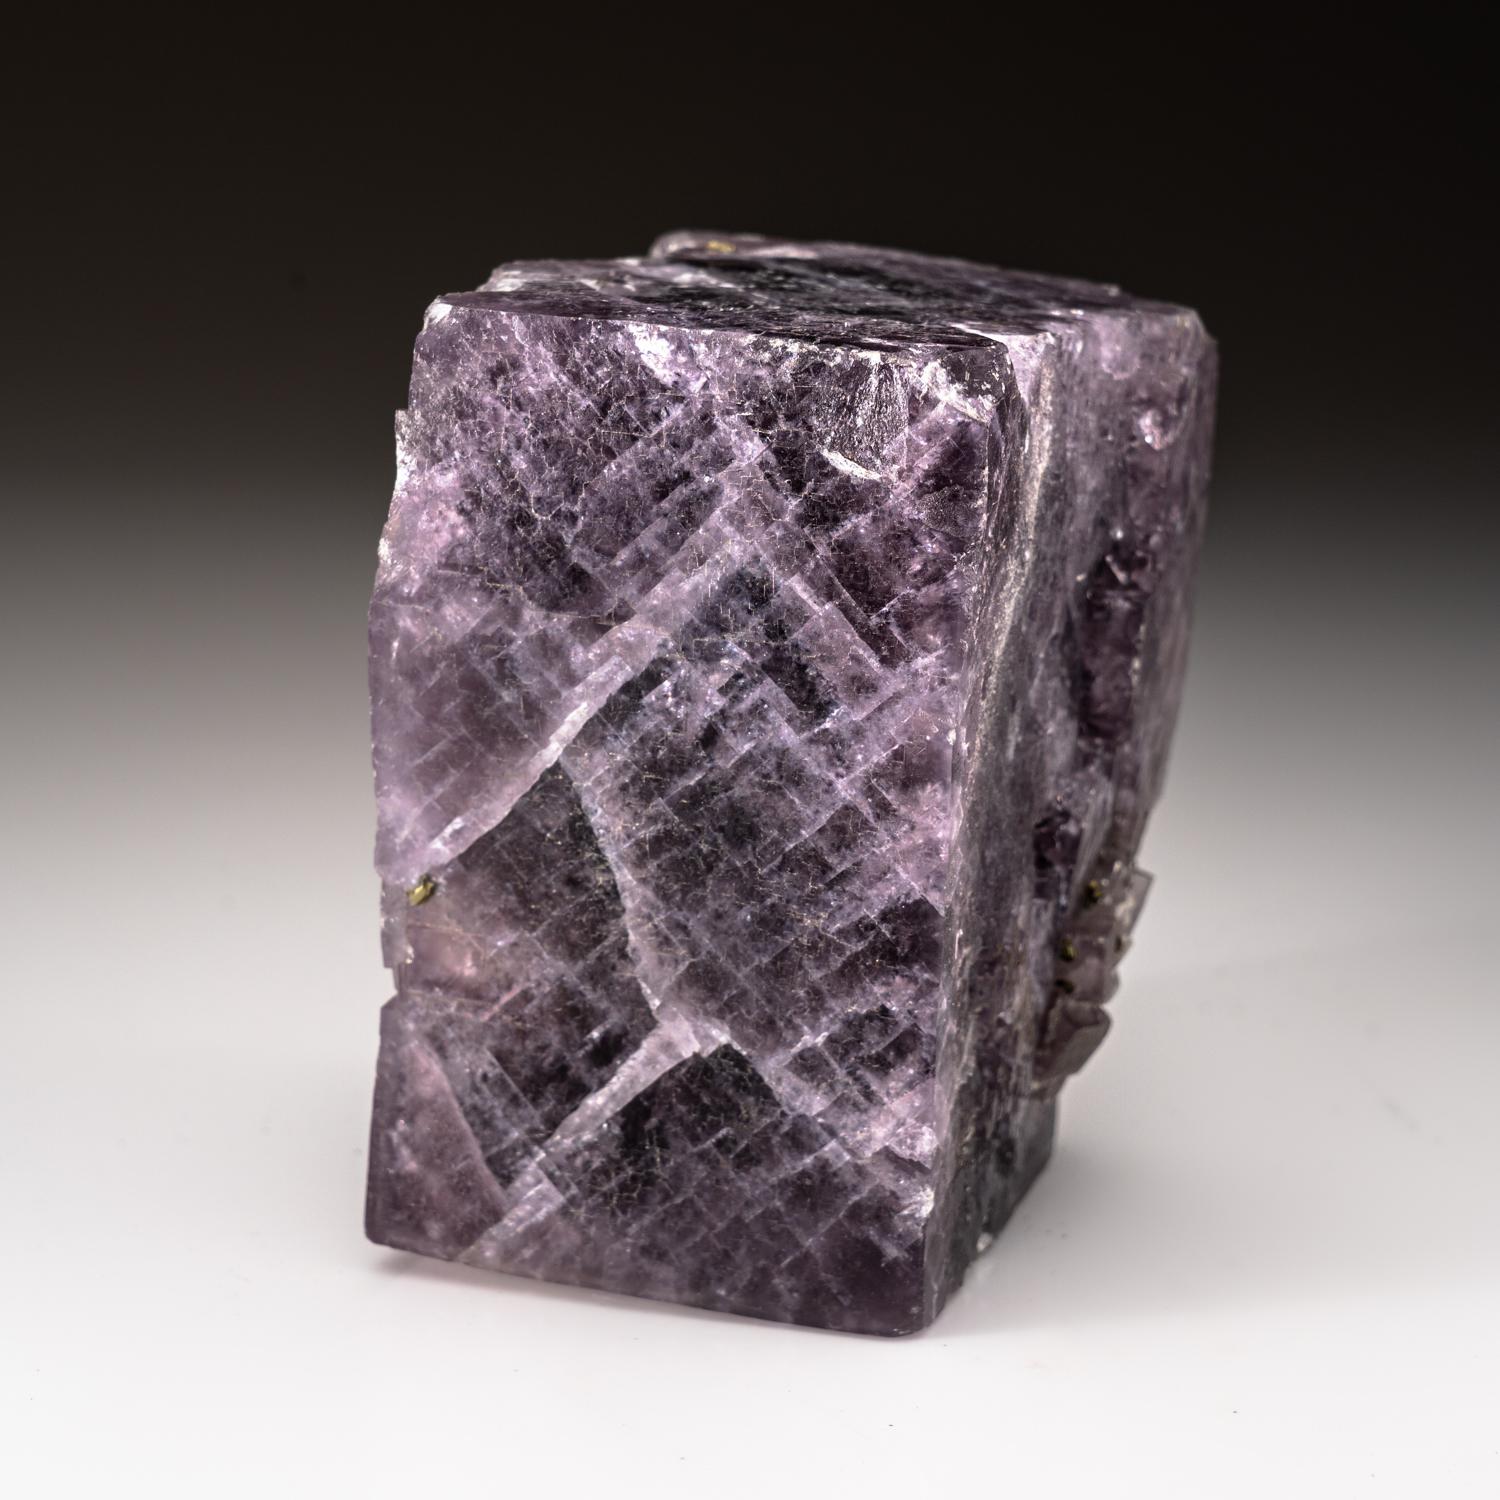 From Caravia-Berbes District, Asturias, Spain

Huge 4 inch single crystal of purple fluorite with rich translucent grape color and well define internal cubic zoning.

 

3 lbs, 3 x 2.5 x 4 inches